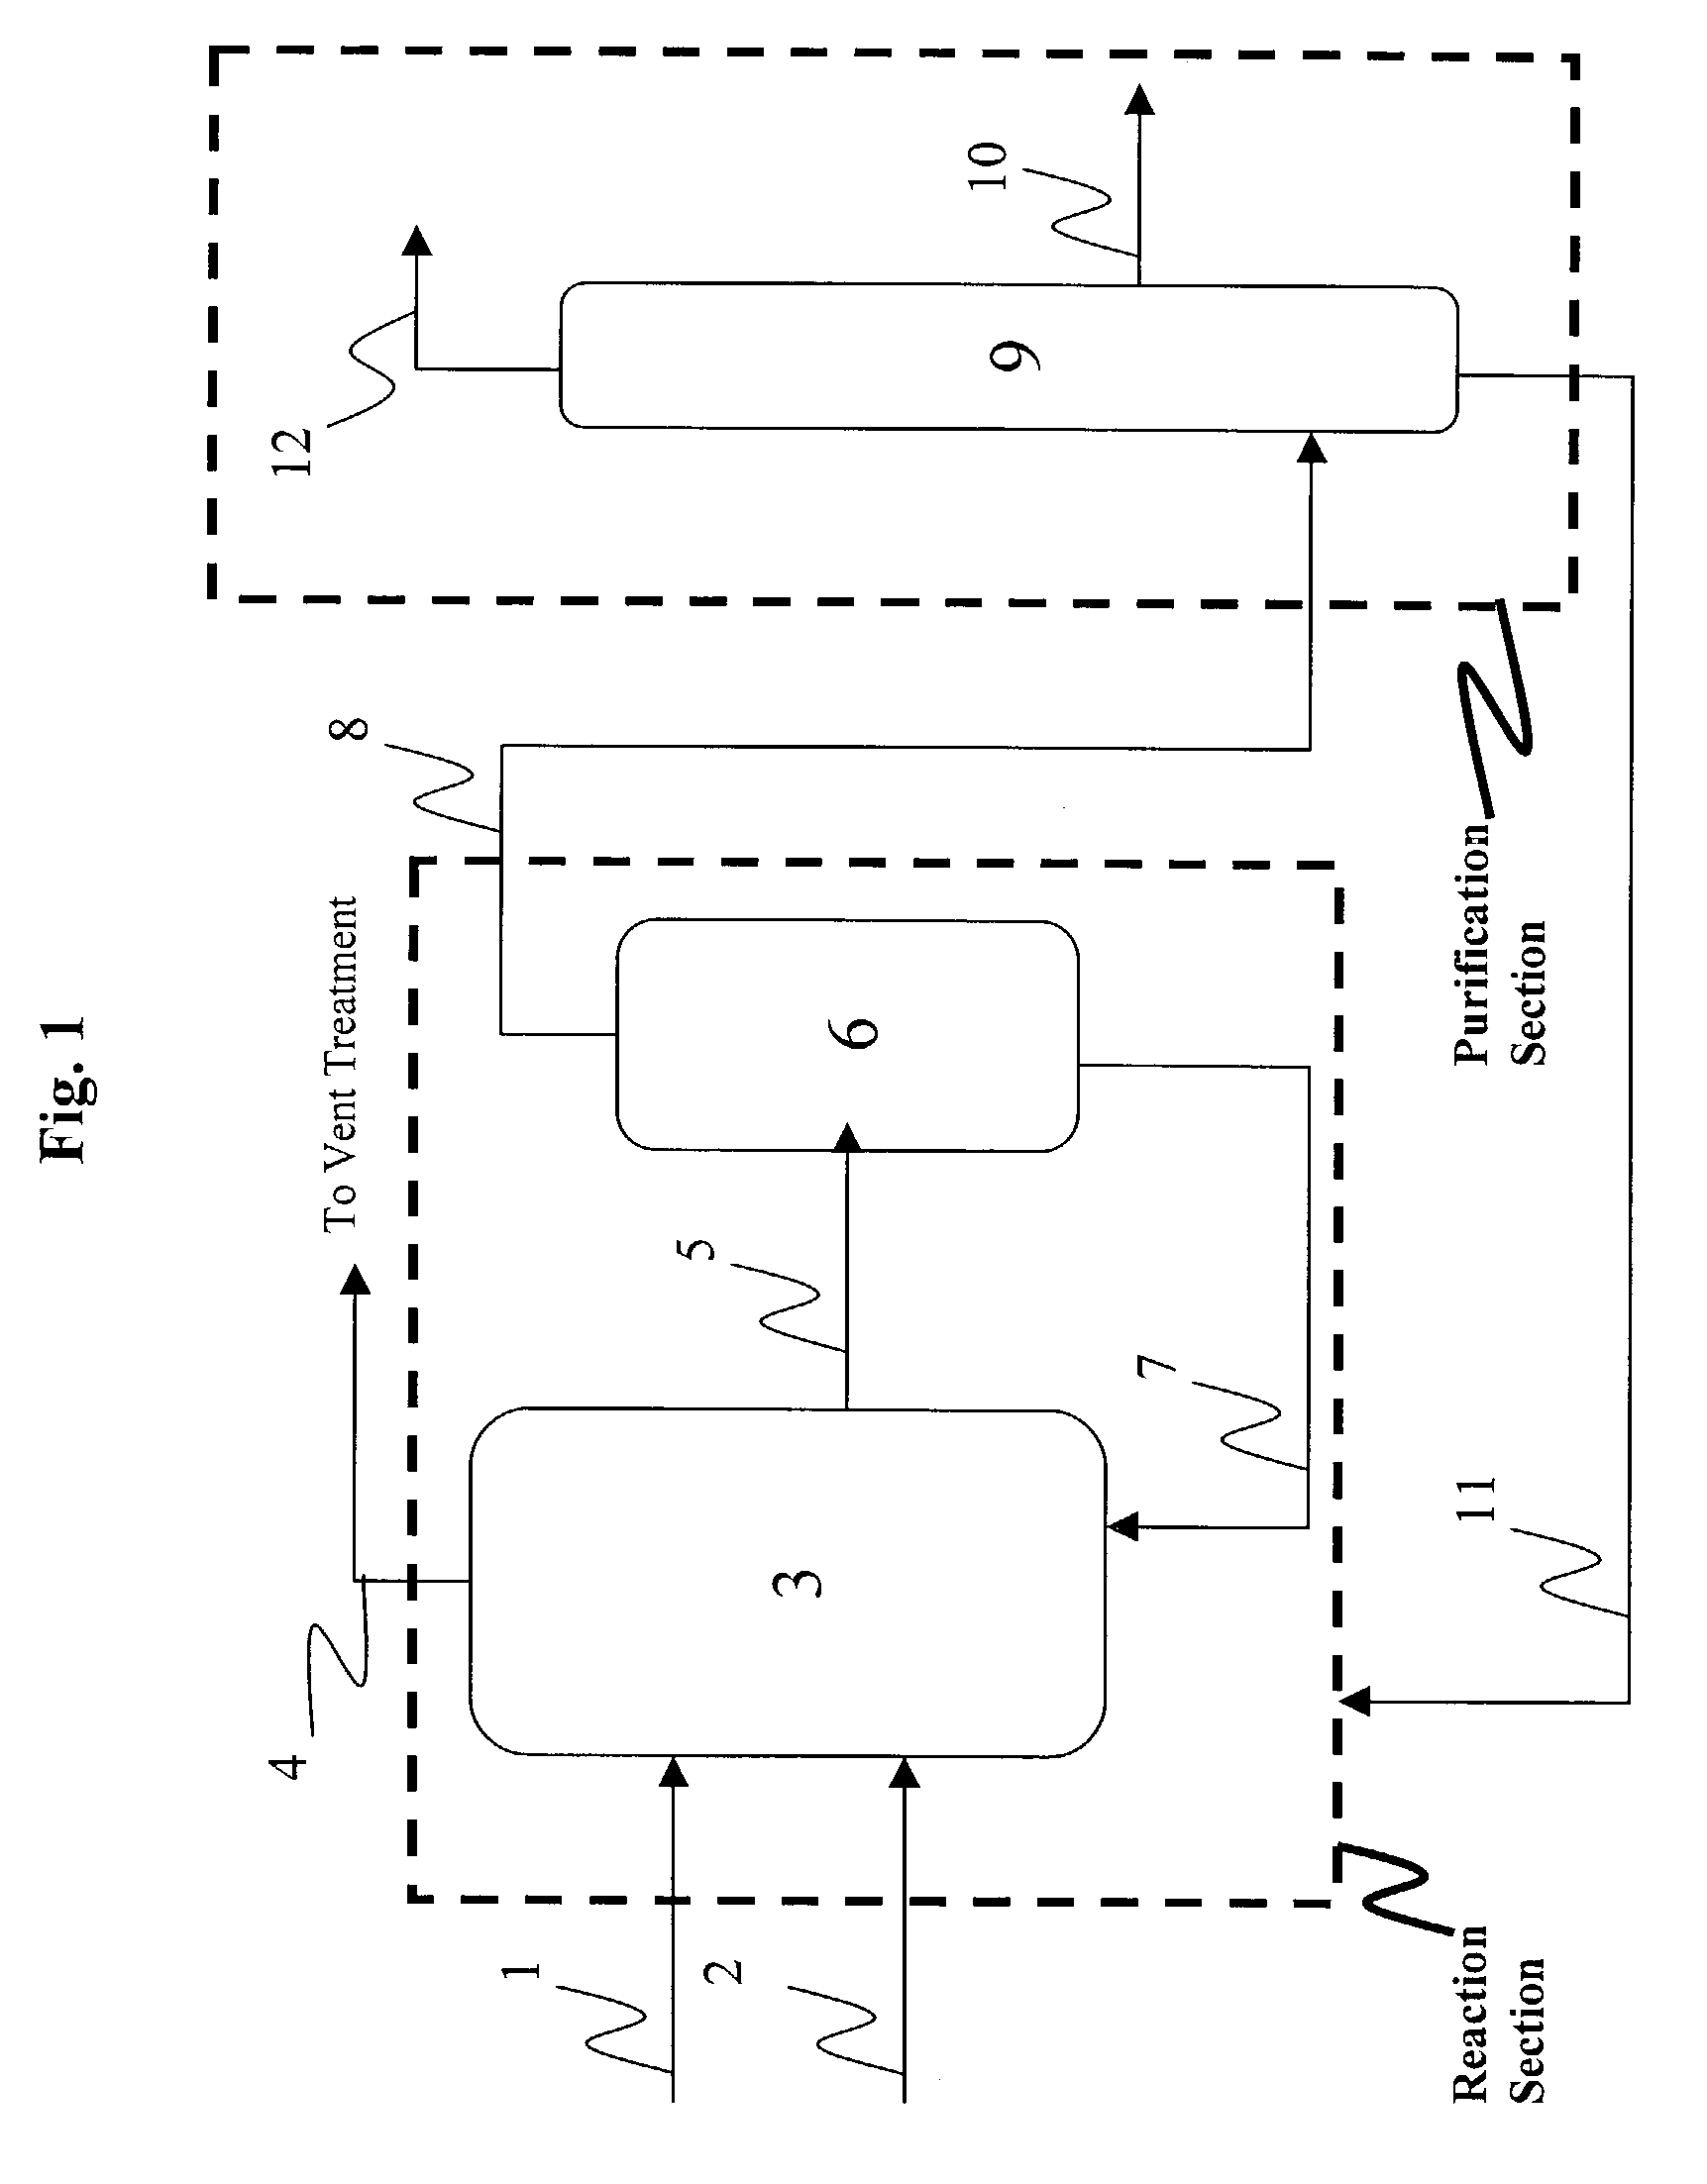 Low water methanol carbonylation process for high acetic acid production and for water balance control